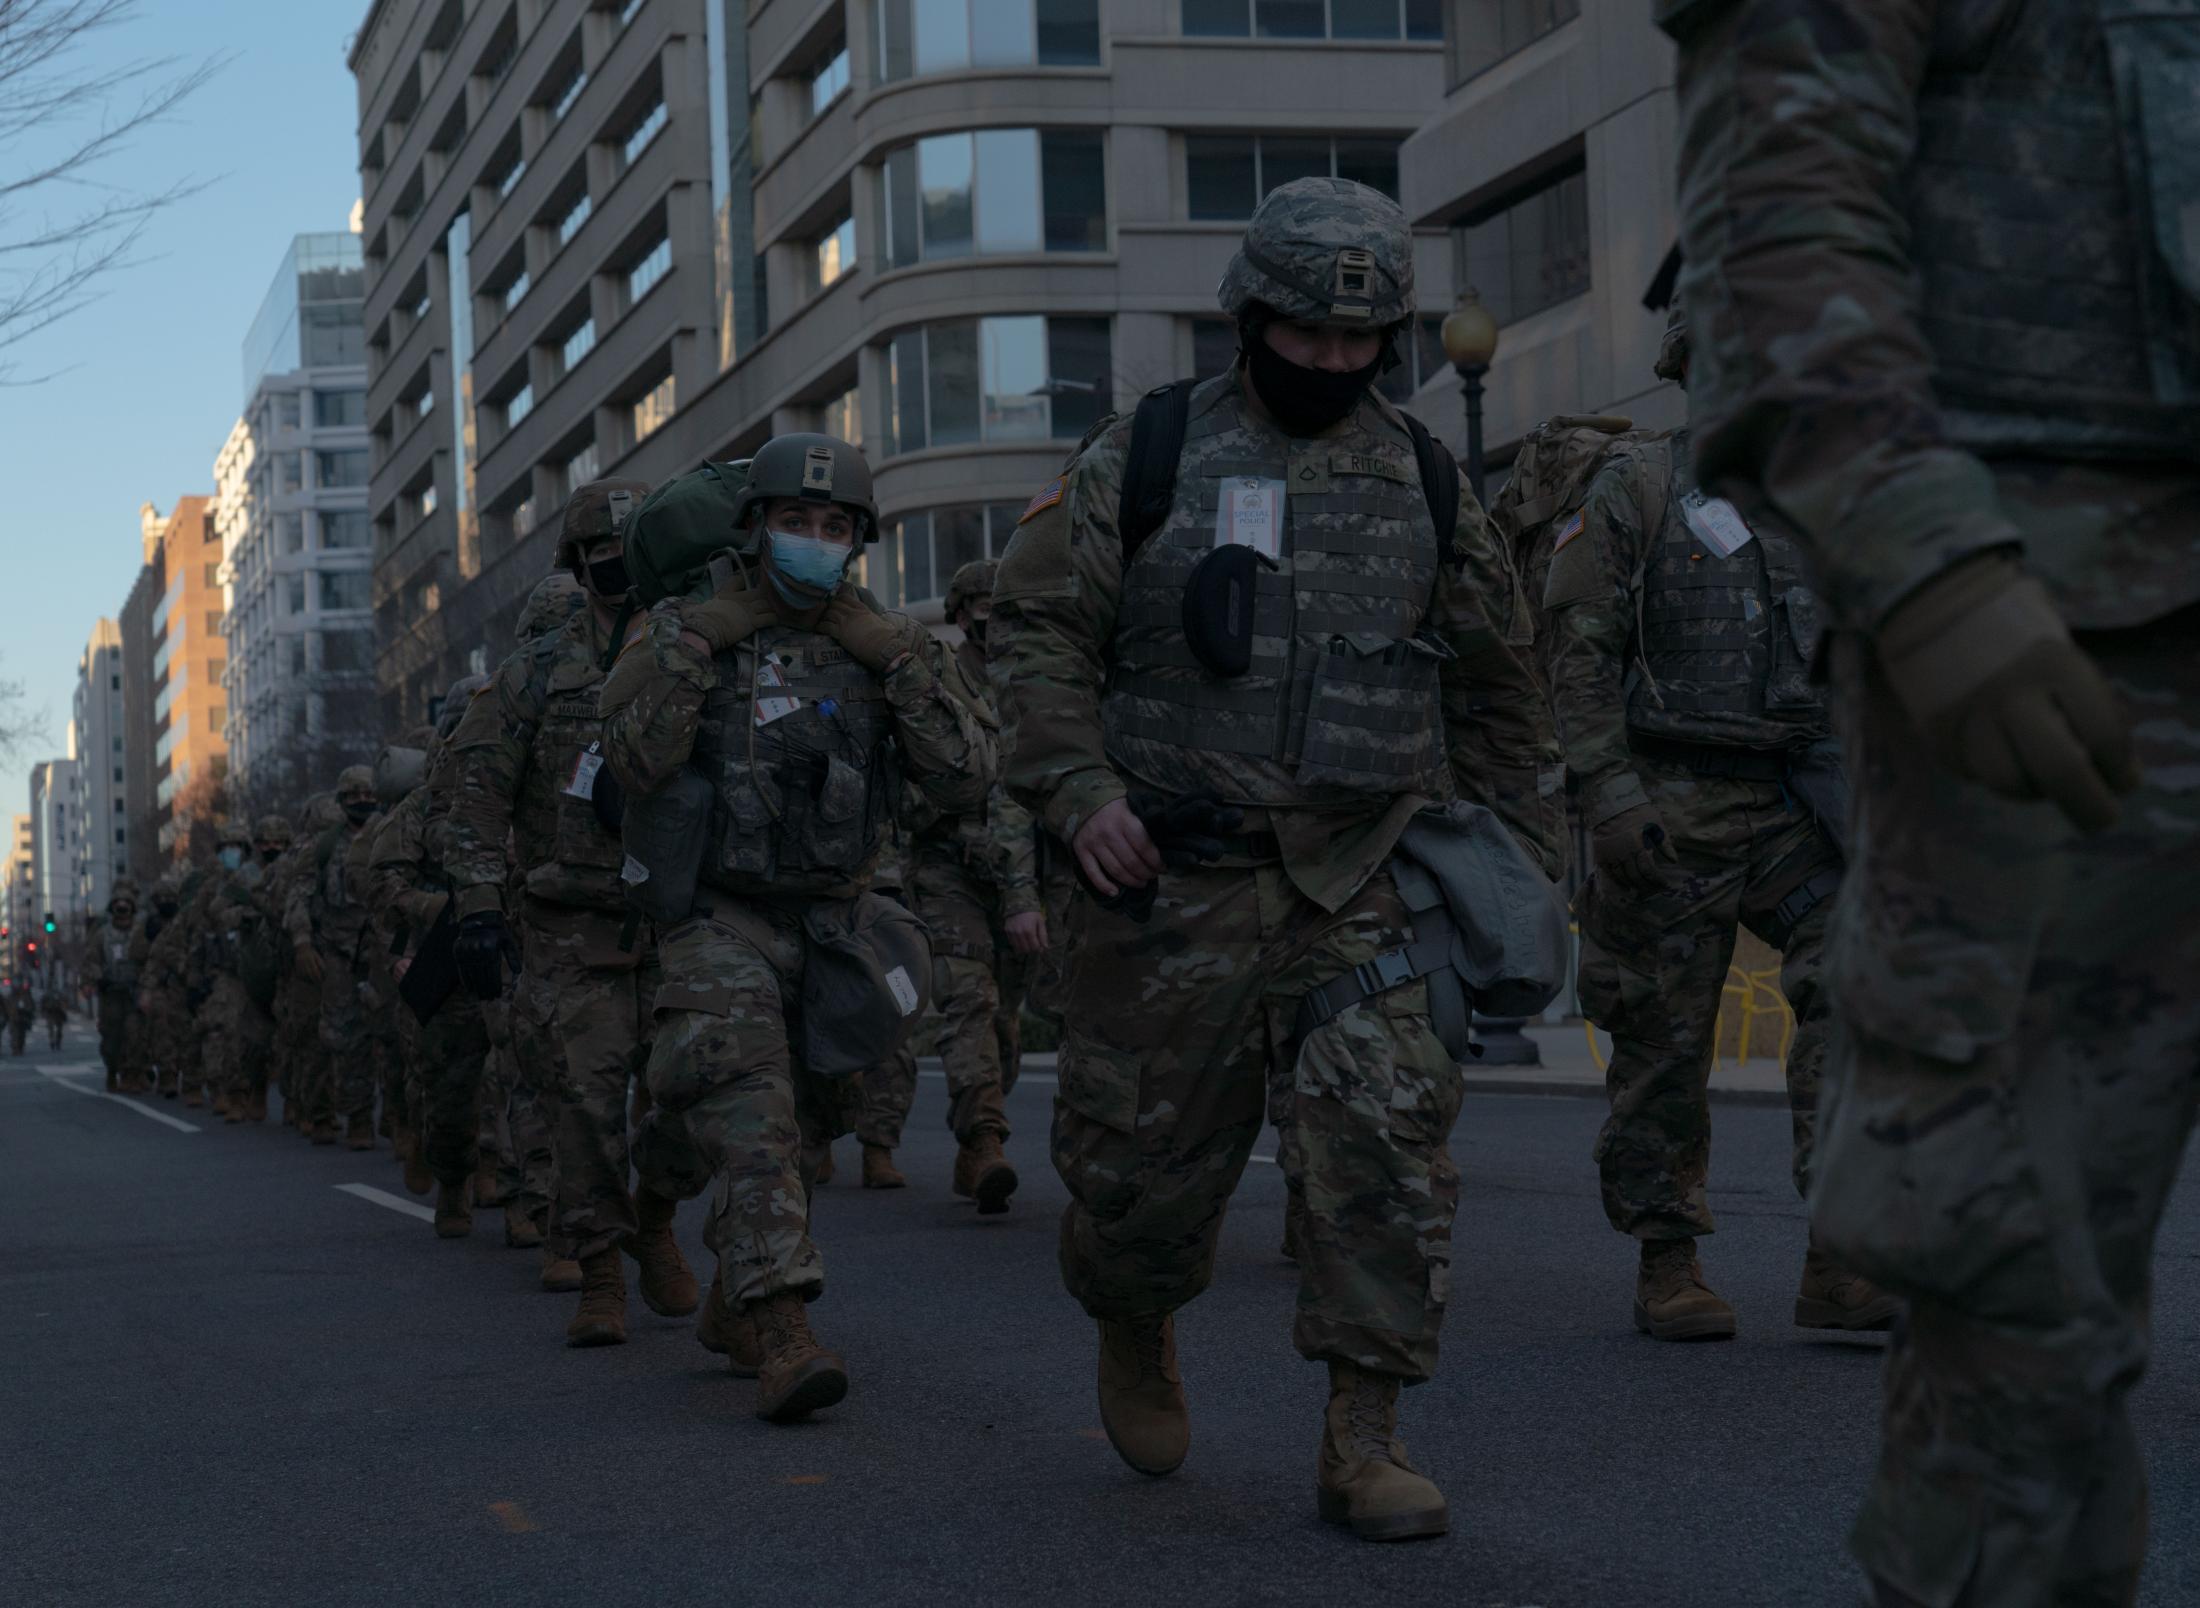 Occupied - National Guardsmen walk towards the National Mall during...